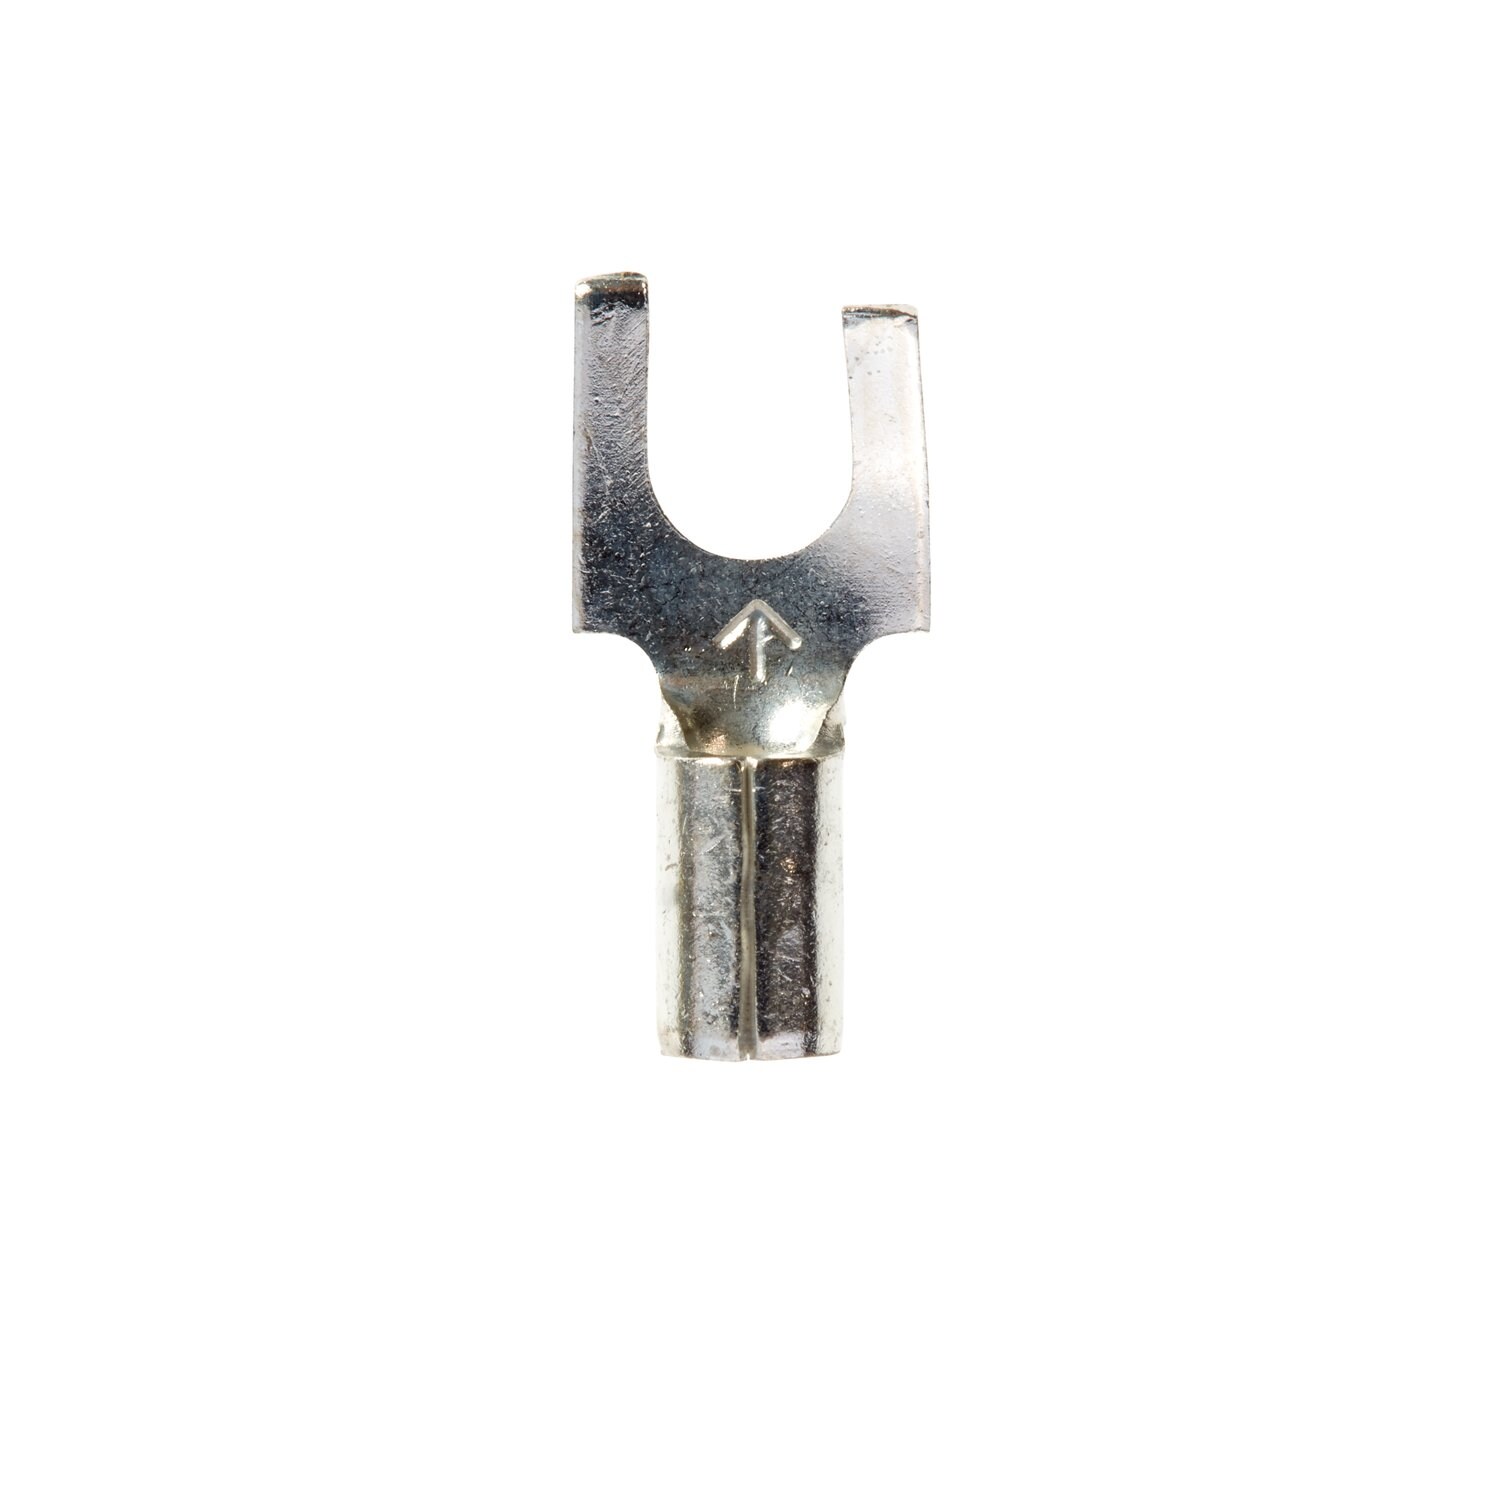 7100164023 - 3M Scotchlok Block Fork, Non-Insulated Butted Seam MU14-8FBK, Stud
Size 8, suitable for use in a terminal block, 1000/Case